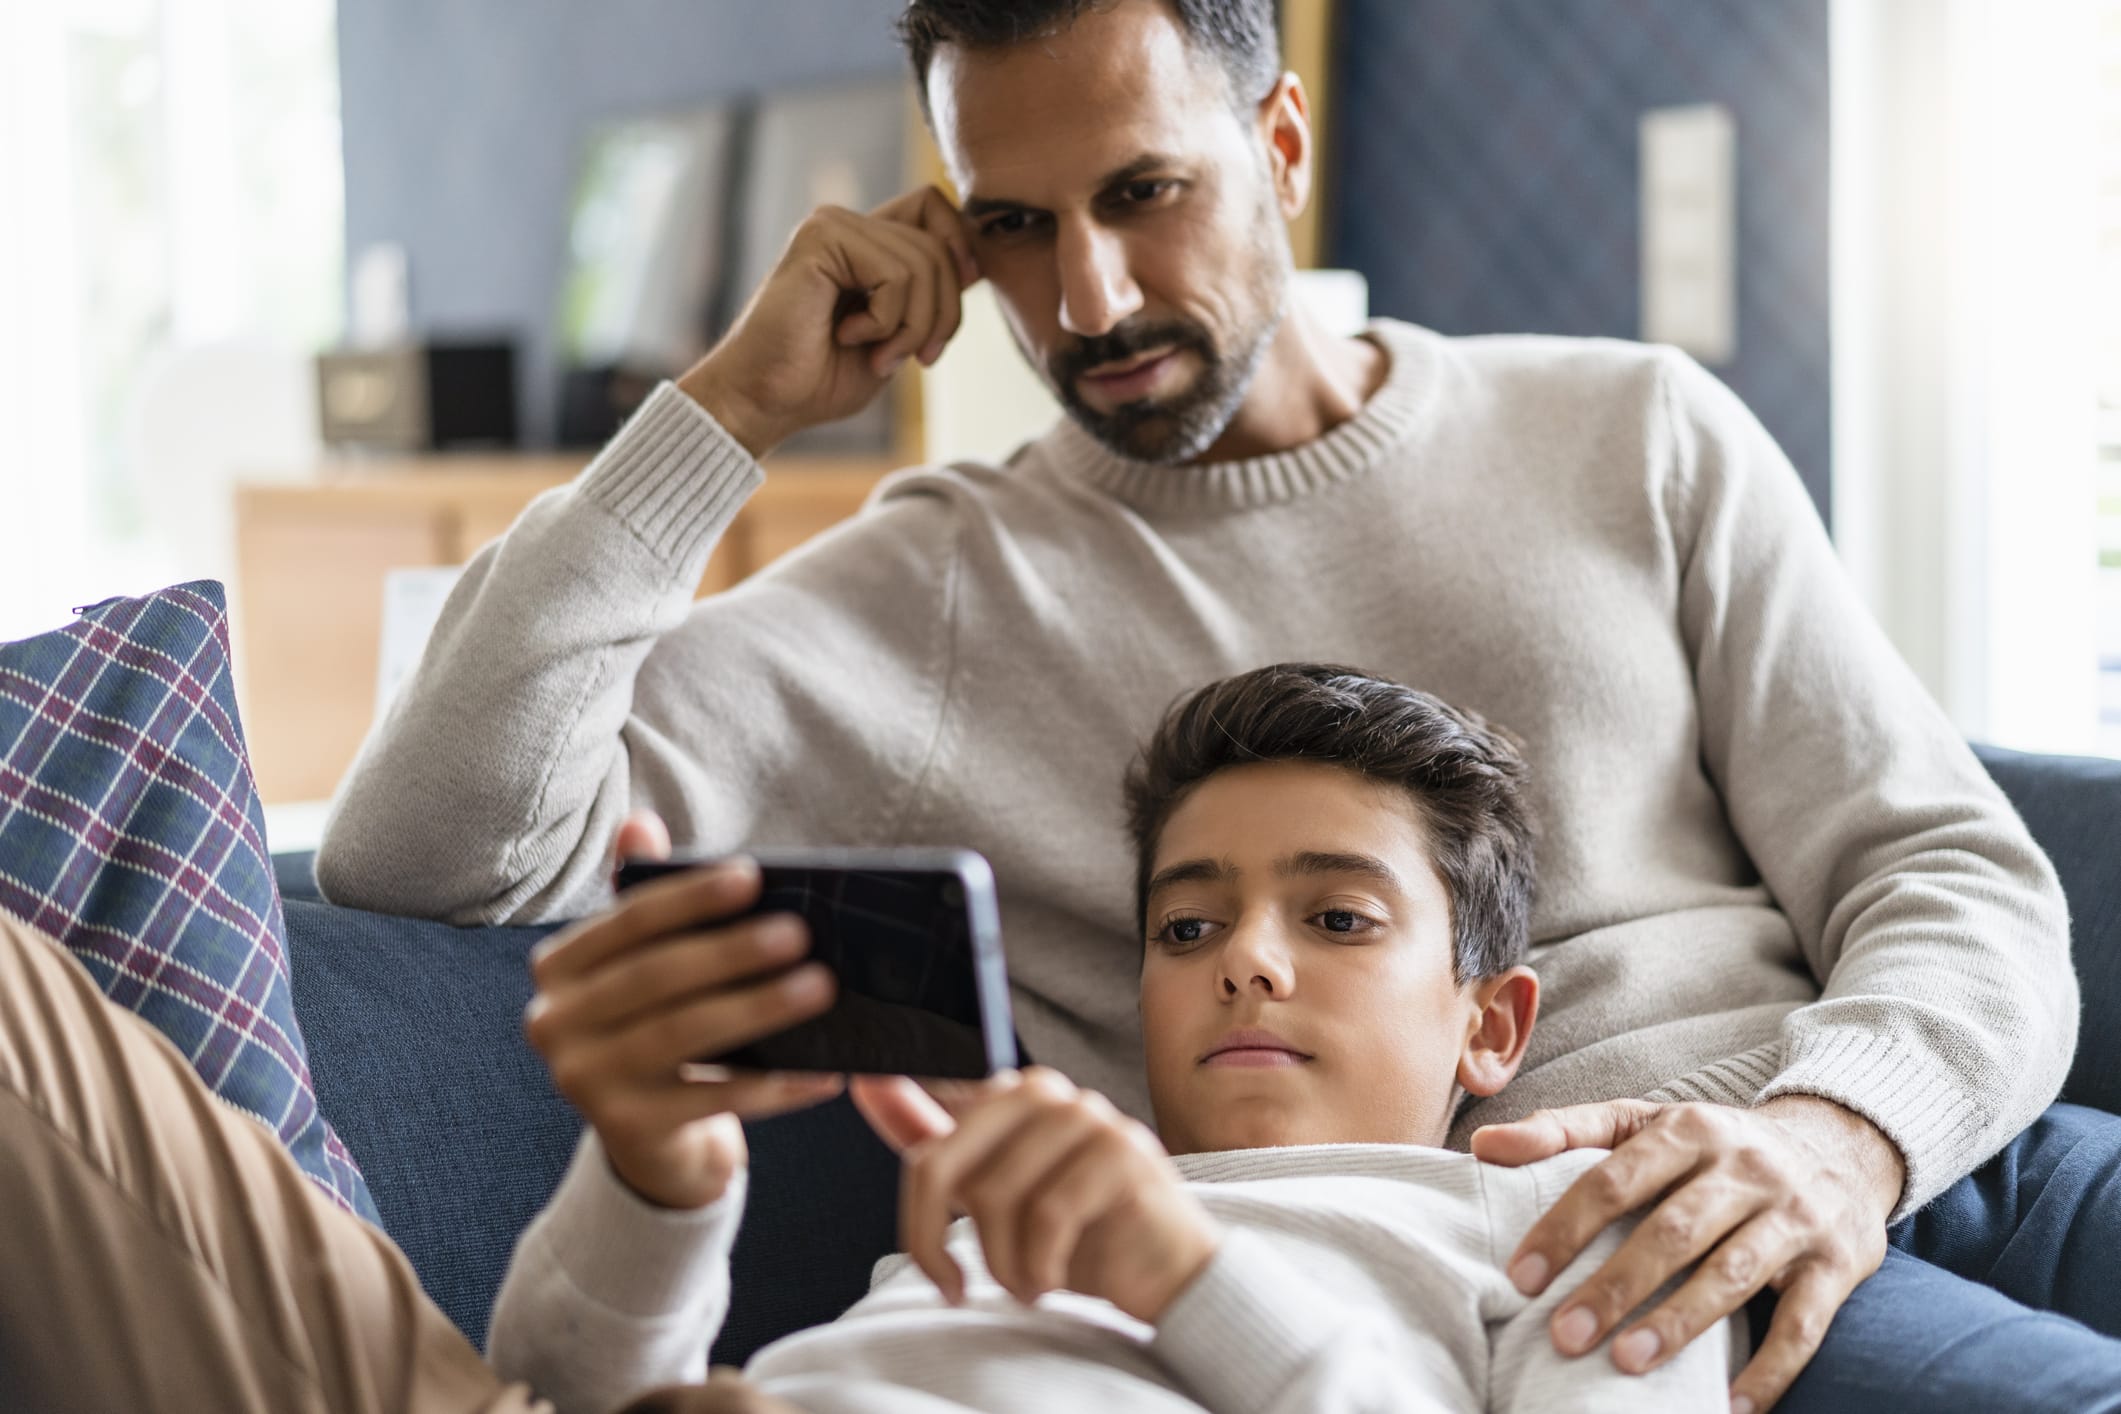 Father and son using smartphone on couch in living room